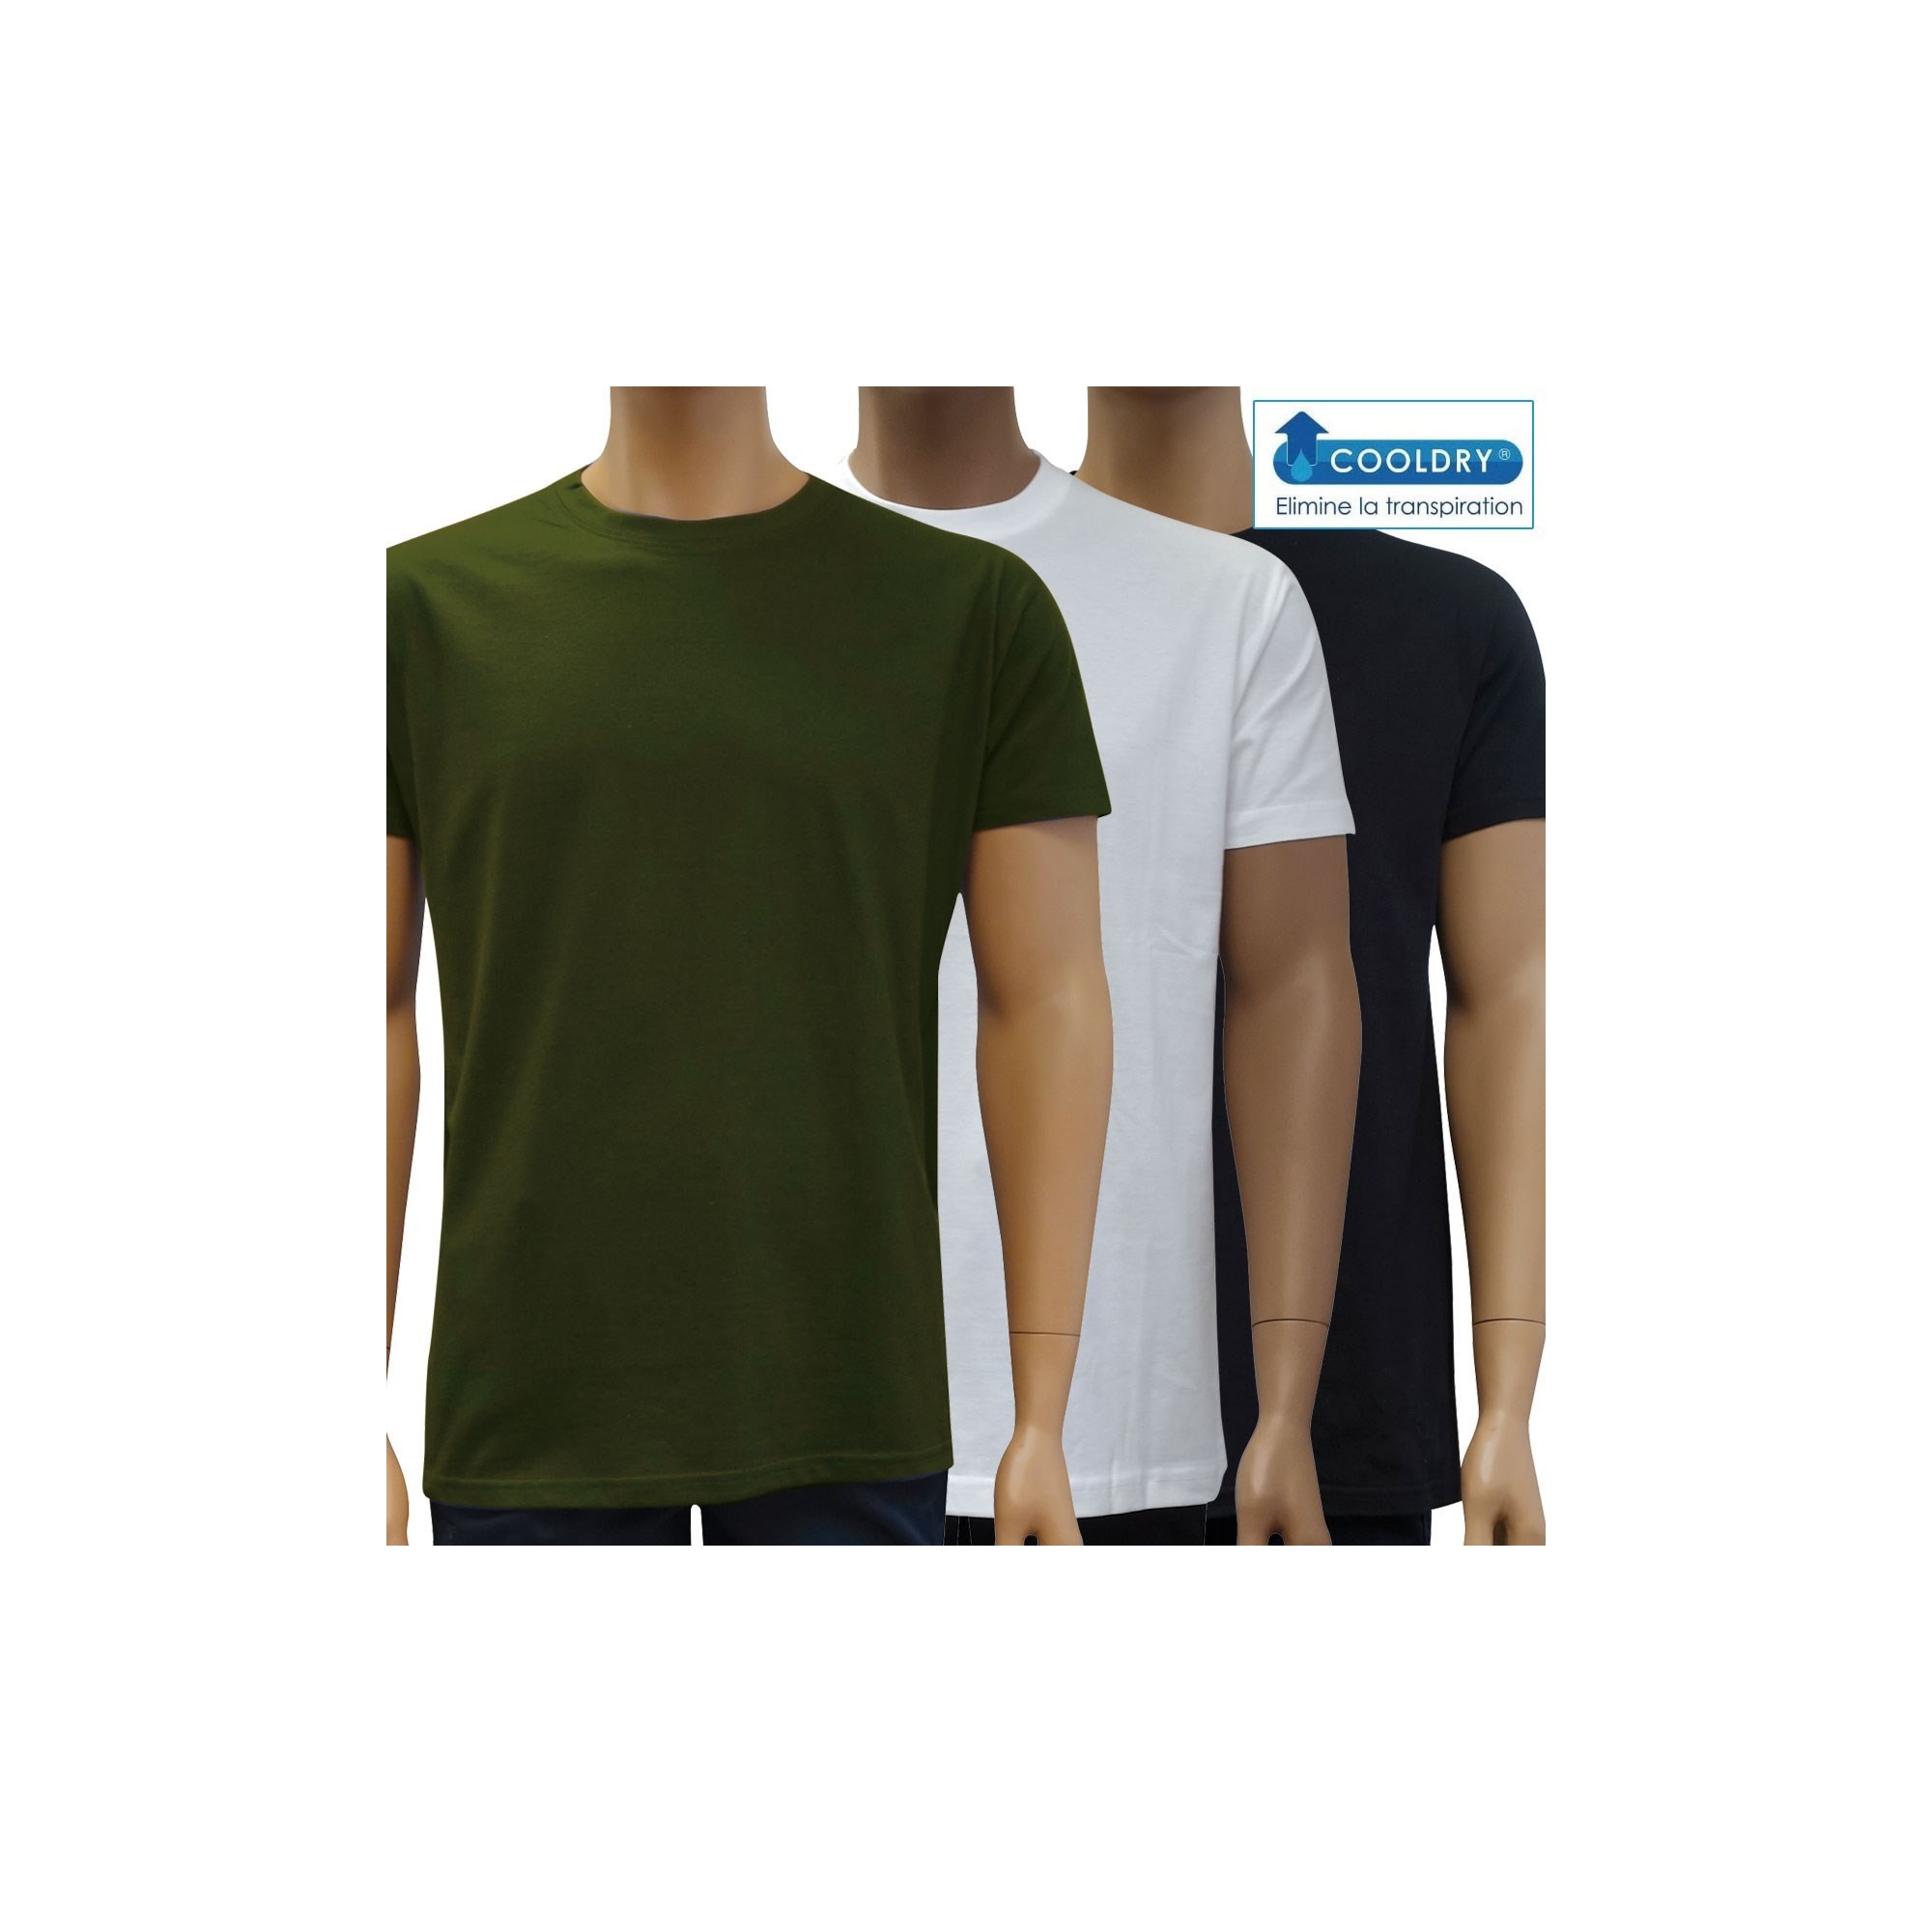 TSHIRT Manches courtes COOLDRY